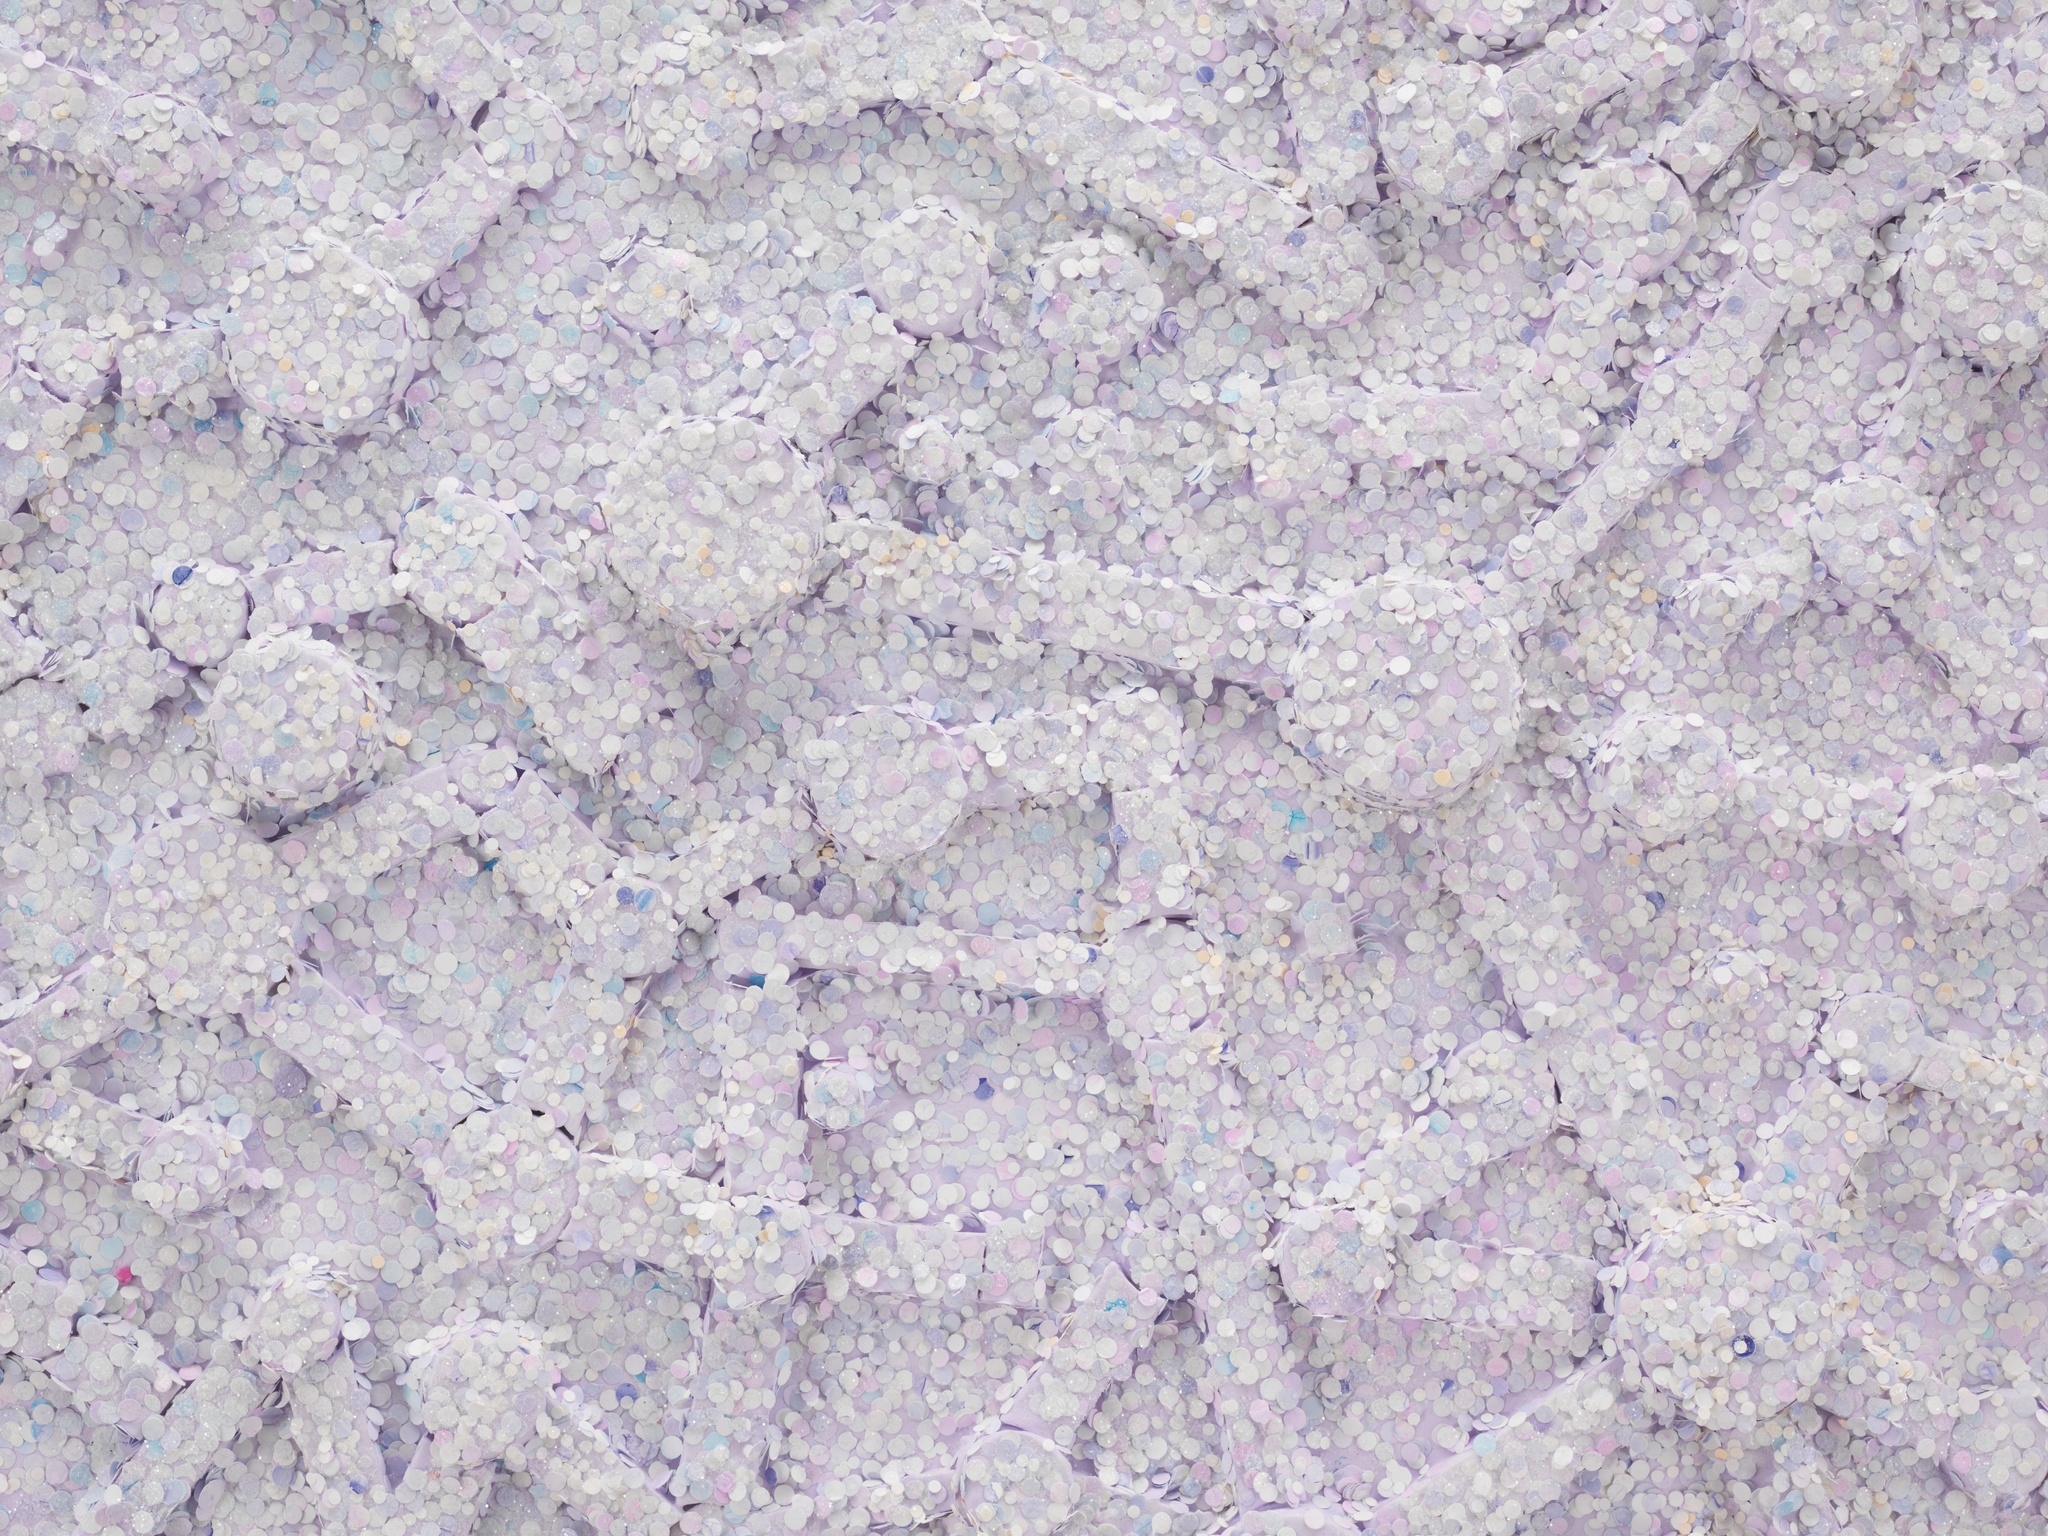 A close-up detail image of a purple abstract canvas with a textured surface including glitter and other elements